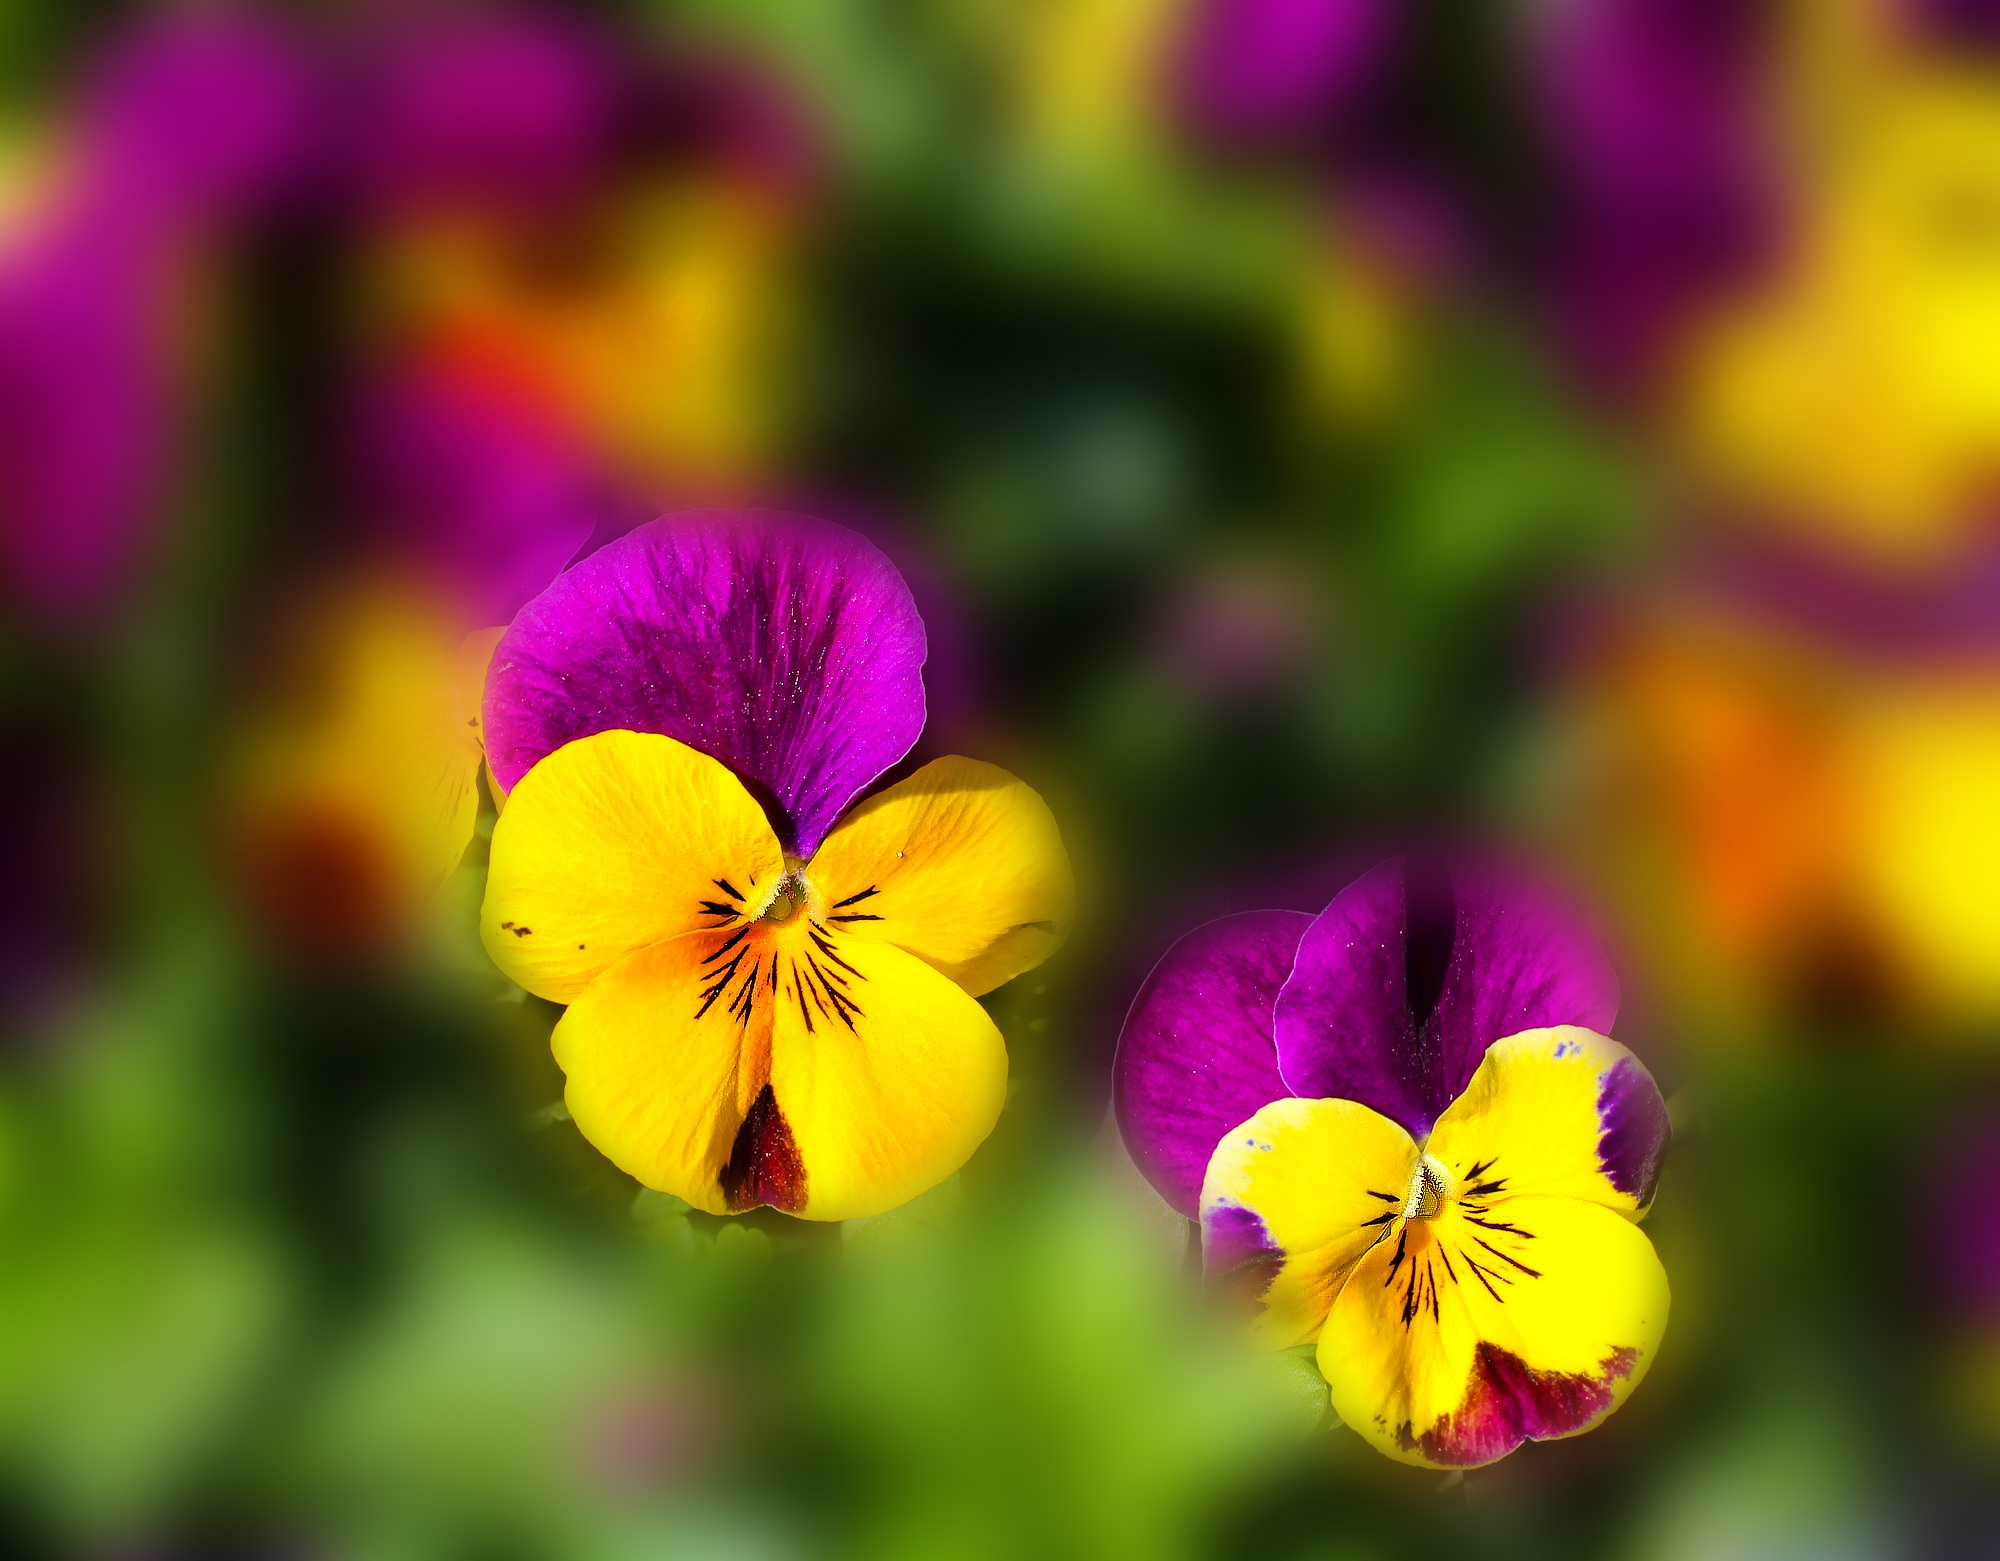 Free photo Colorful violets in yellow and purple colors